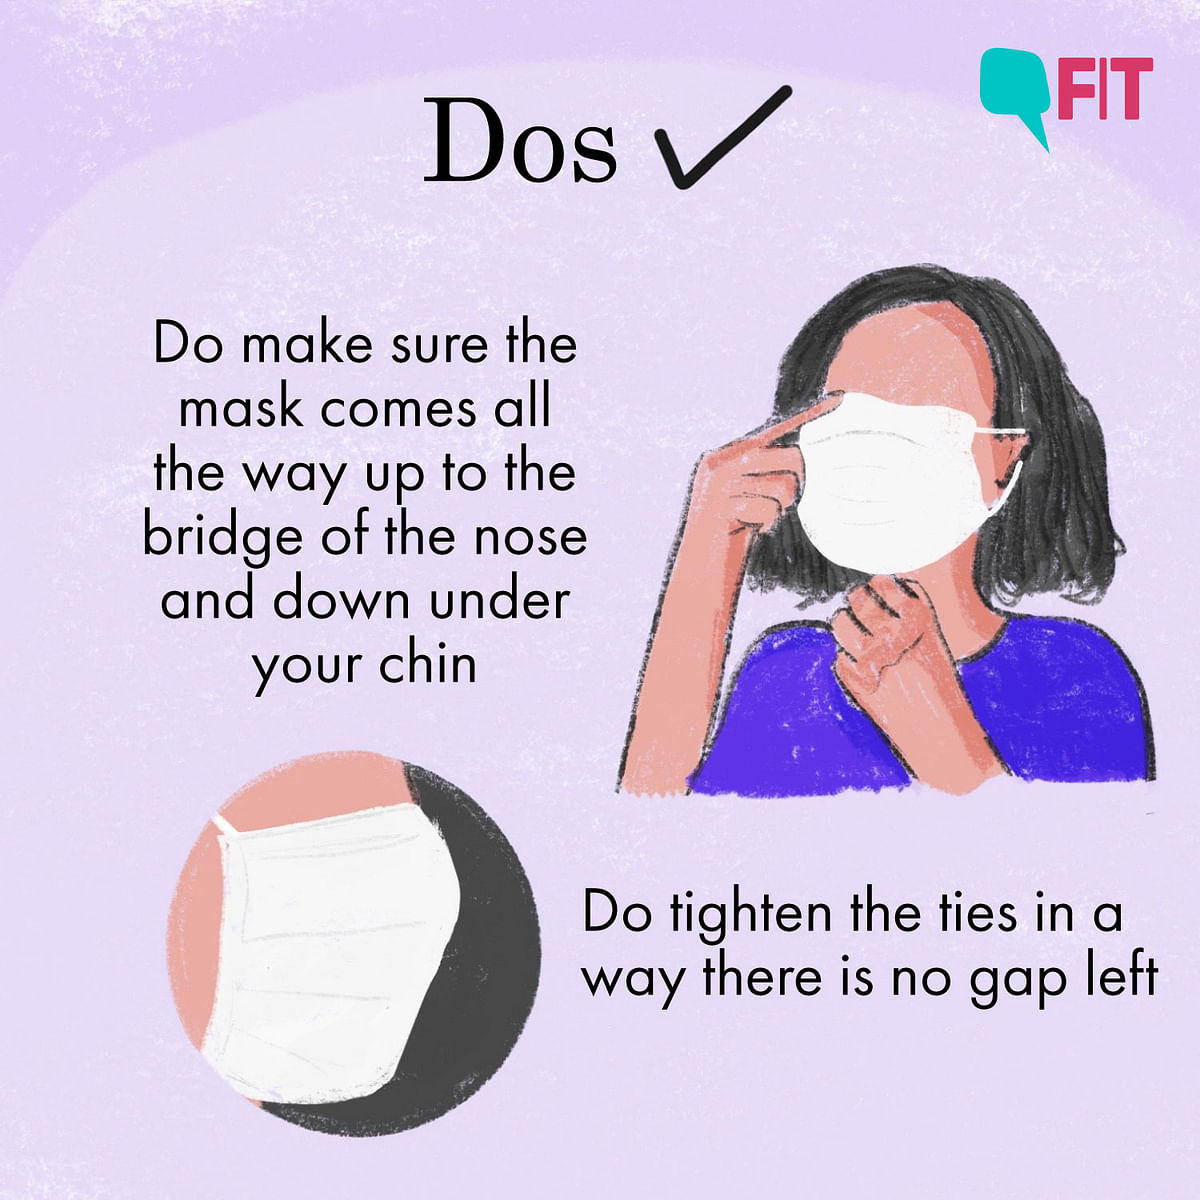 The right way of wearing a mask&nbsp;